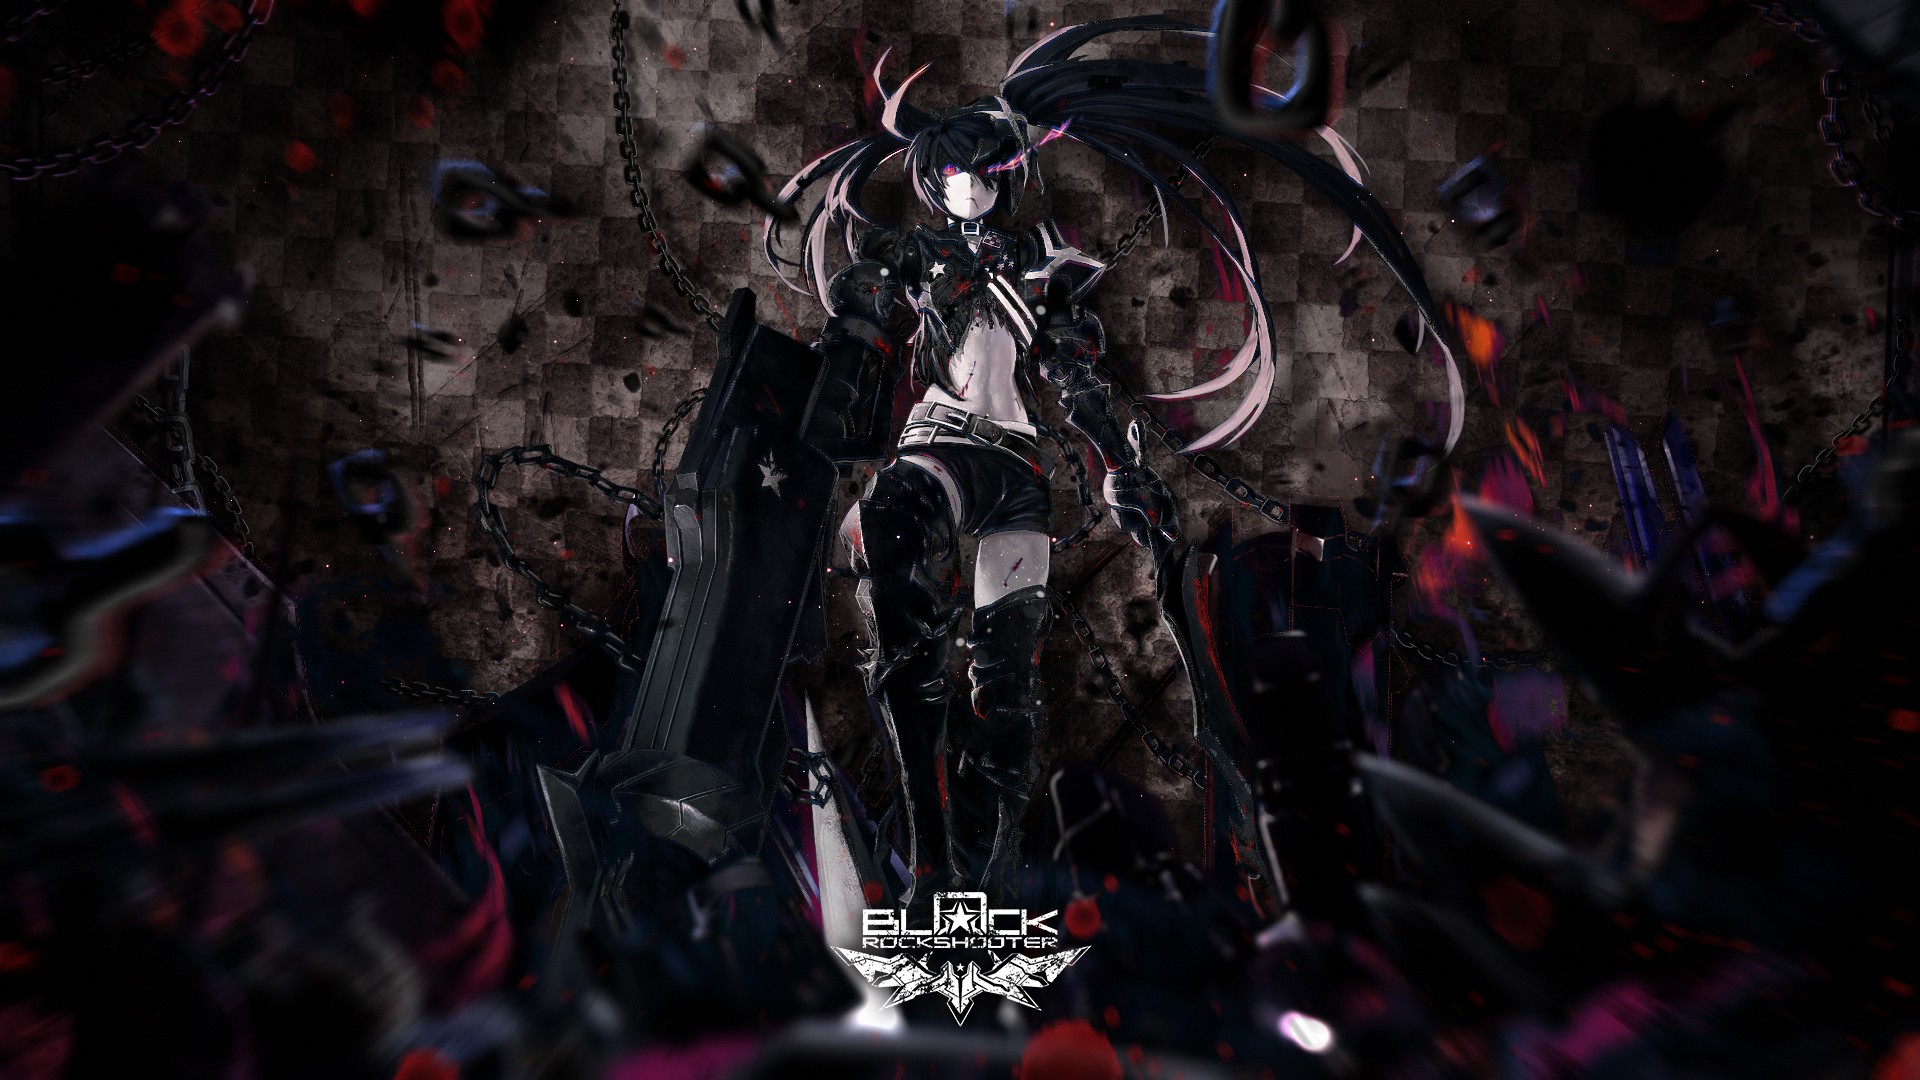 Insane Black Rock Shooter | [The Rebirth] by Awakening-Scarlet, lain and Mackaged